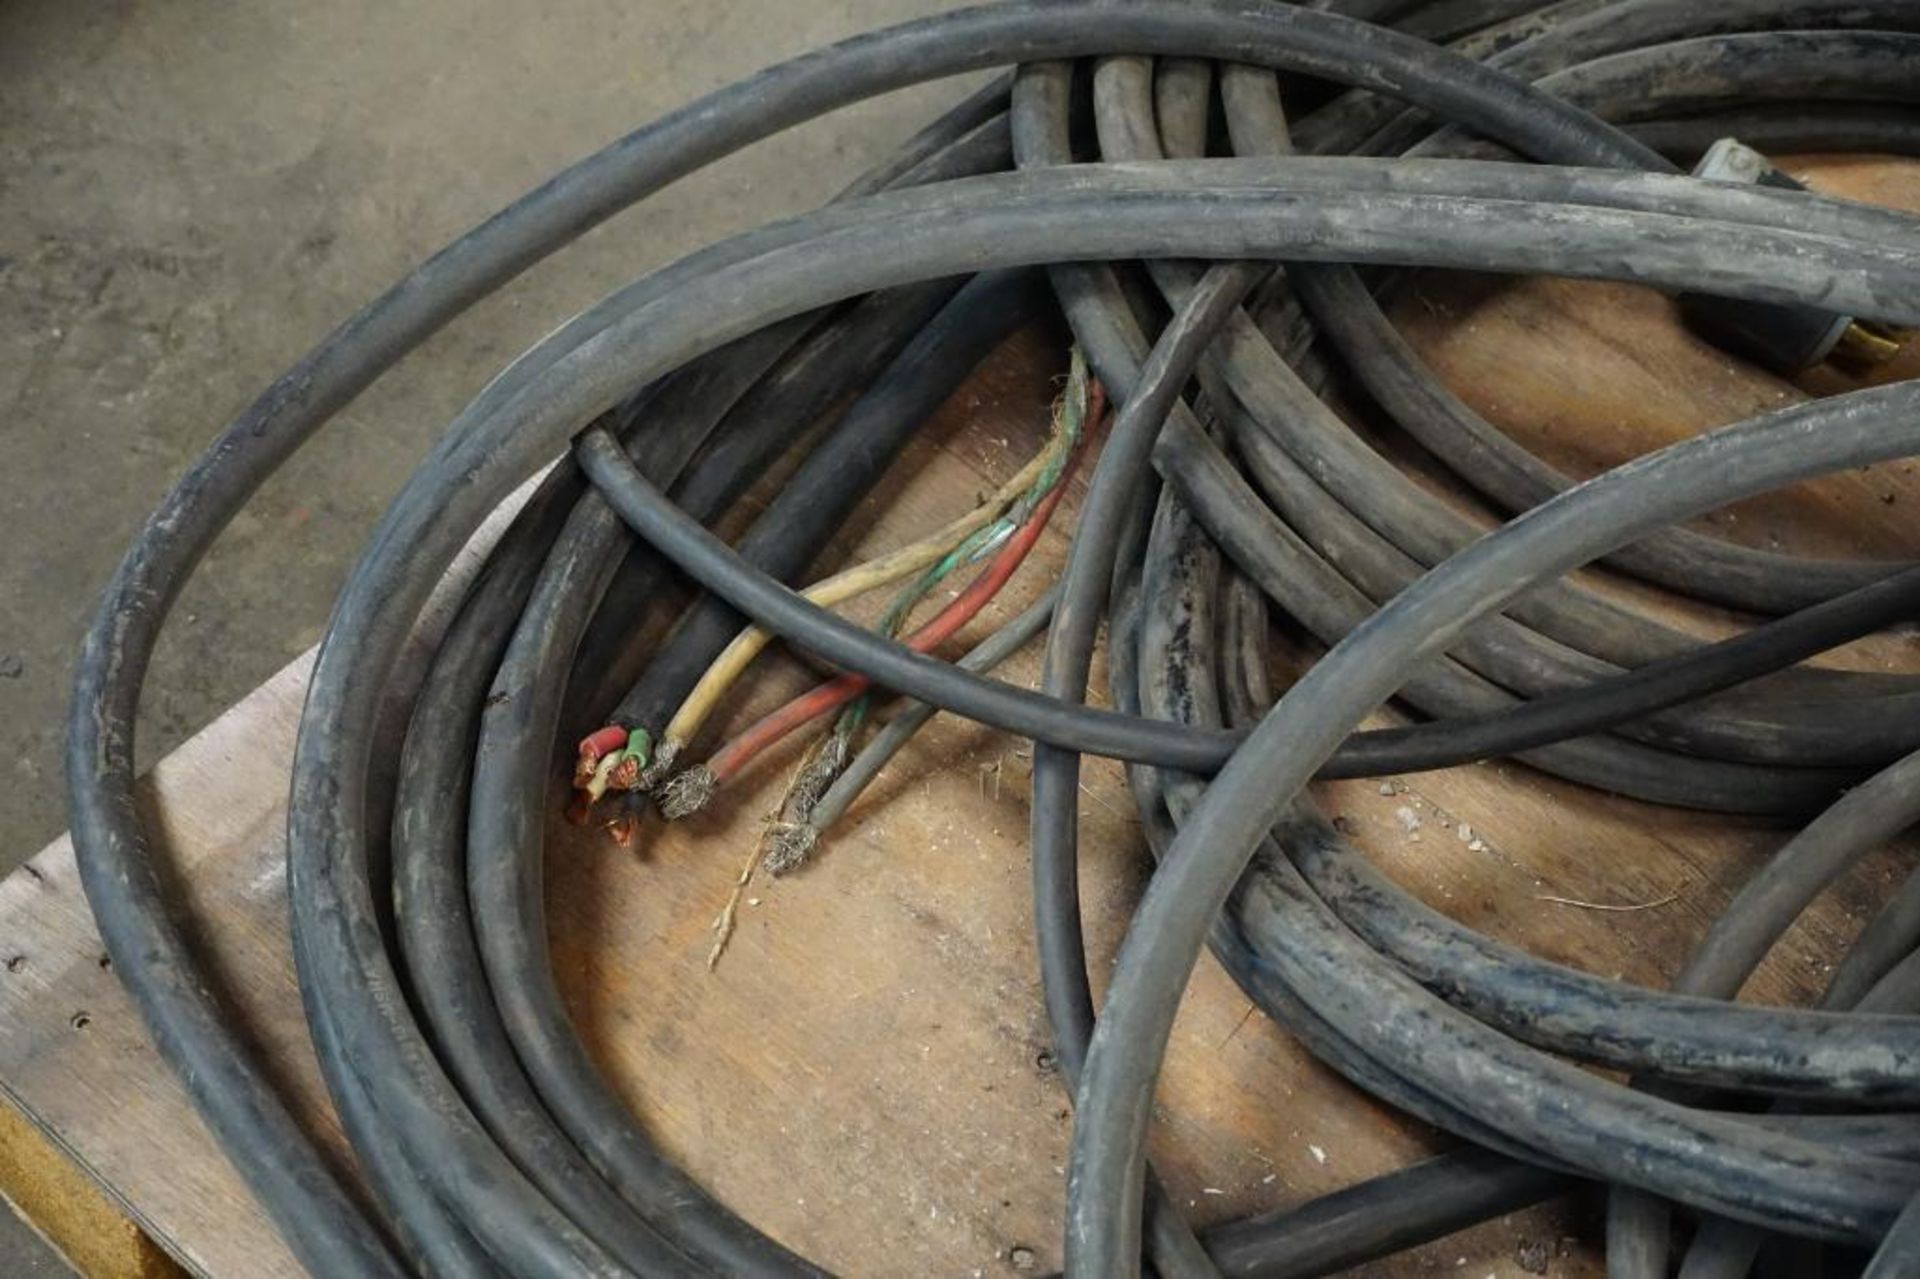 Electric Heavy Duty Cords - Image 4 of 7